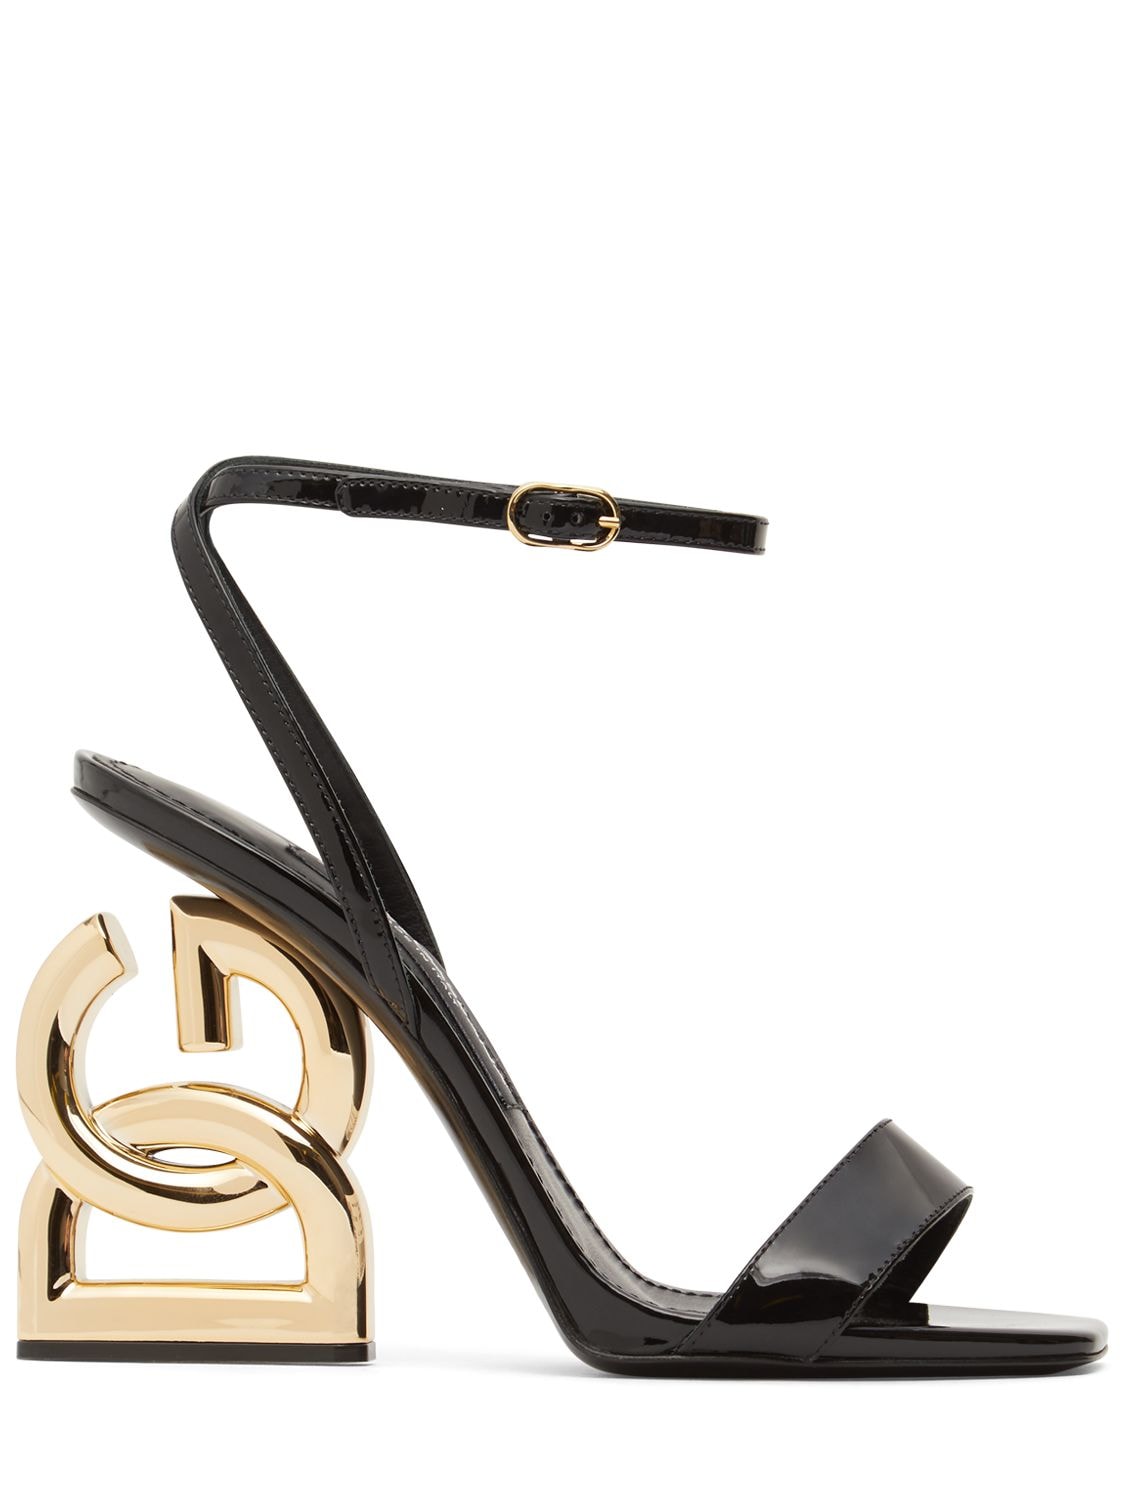 Dolce & Gabbana 105mm Keira Patent Leather Sandals In Black | ModeSens